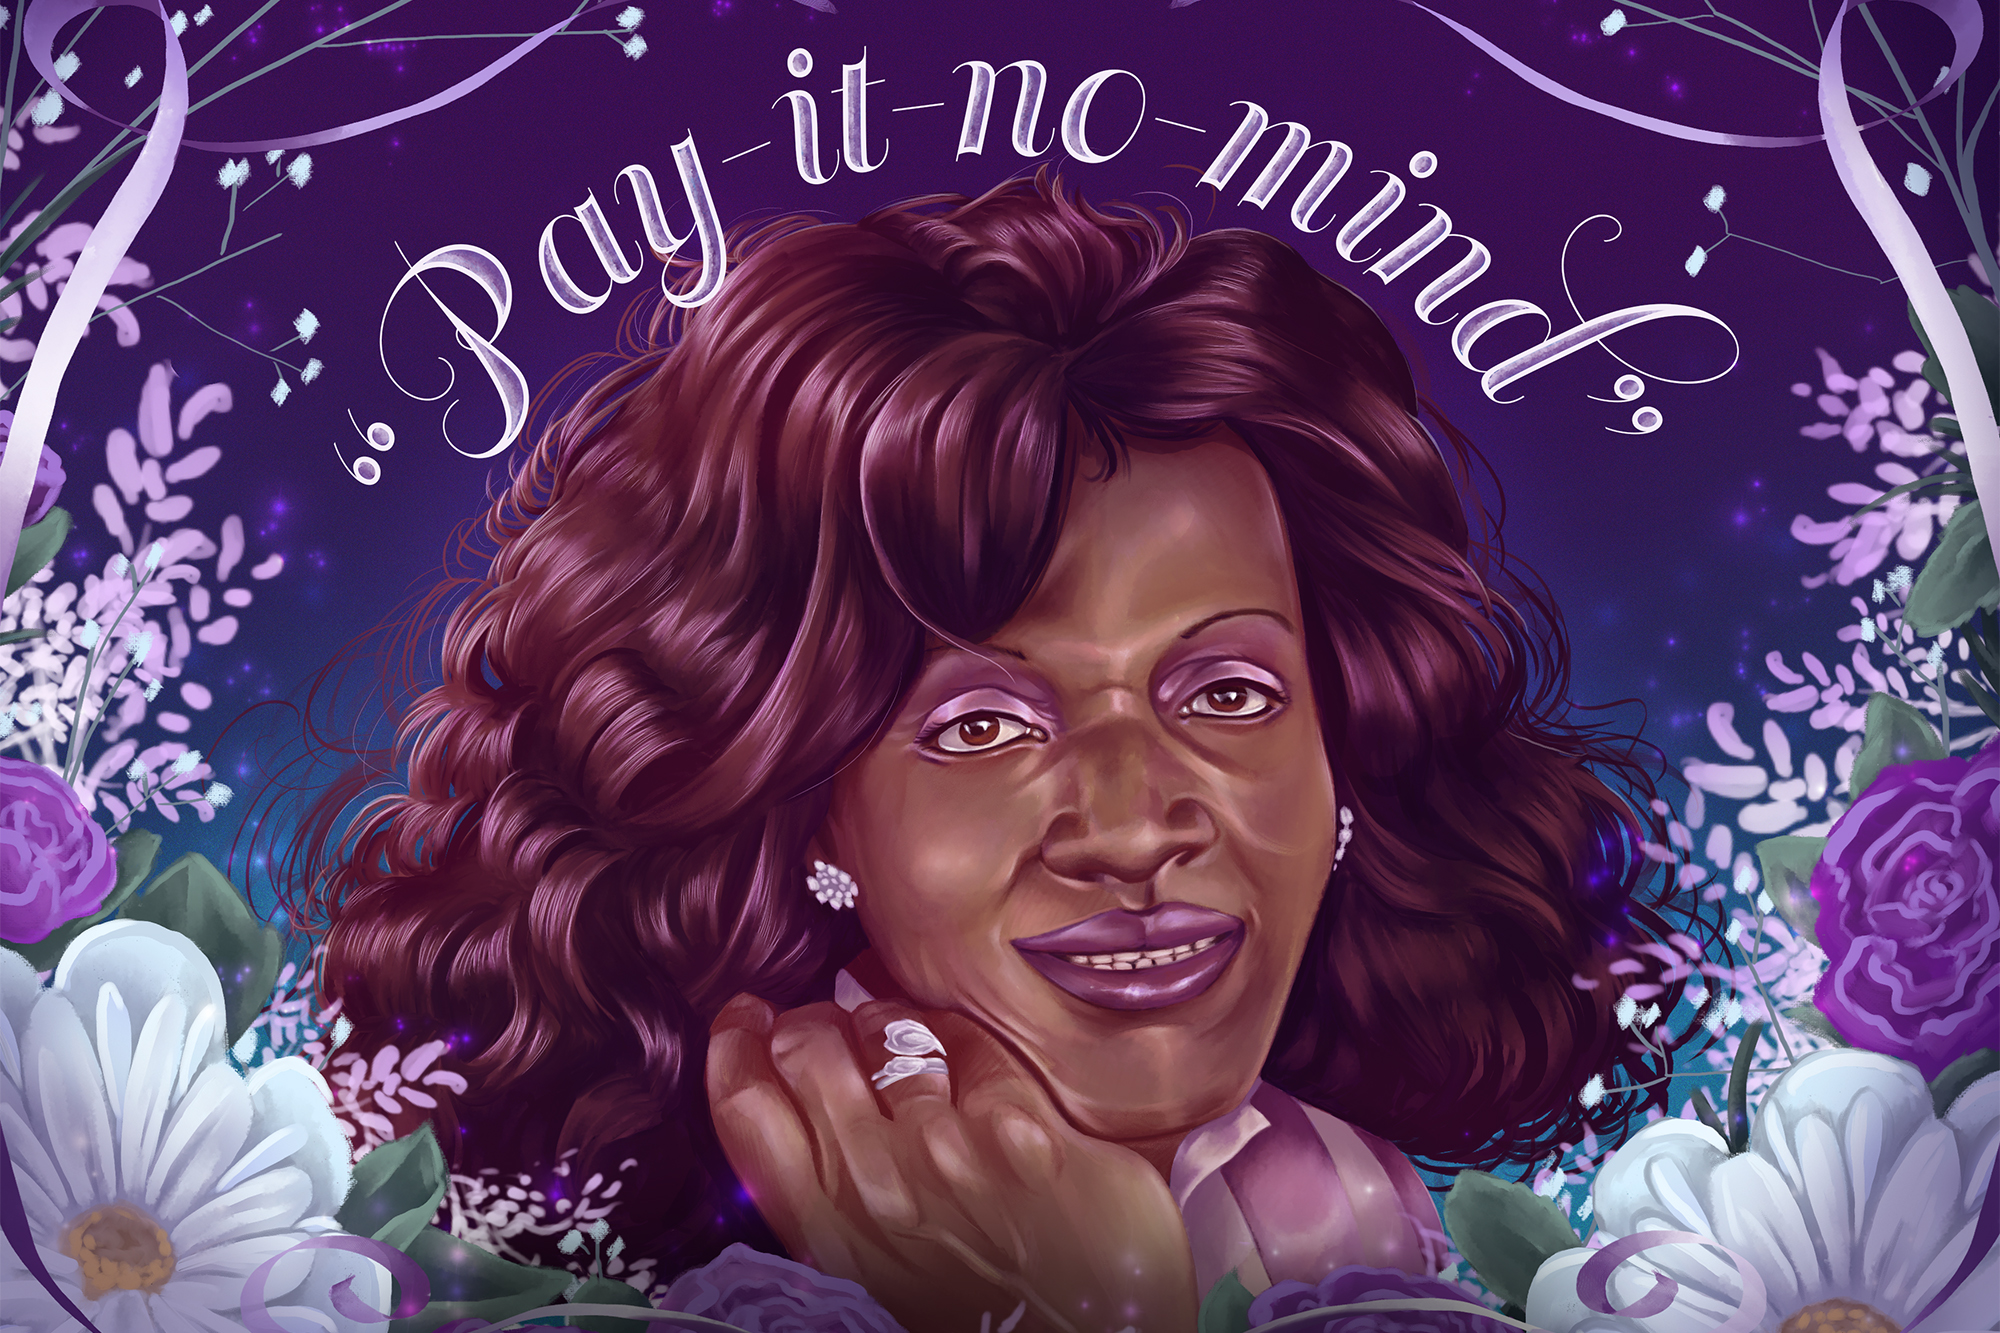 A painted portrait of Marsha P. Johnson, with beautiful script words framing her flowing hair that reads, "Pay-It-No-Mind." Art by Sarah Black, text design by Heather Lawver.